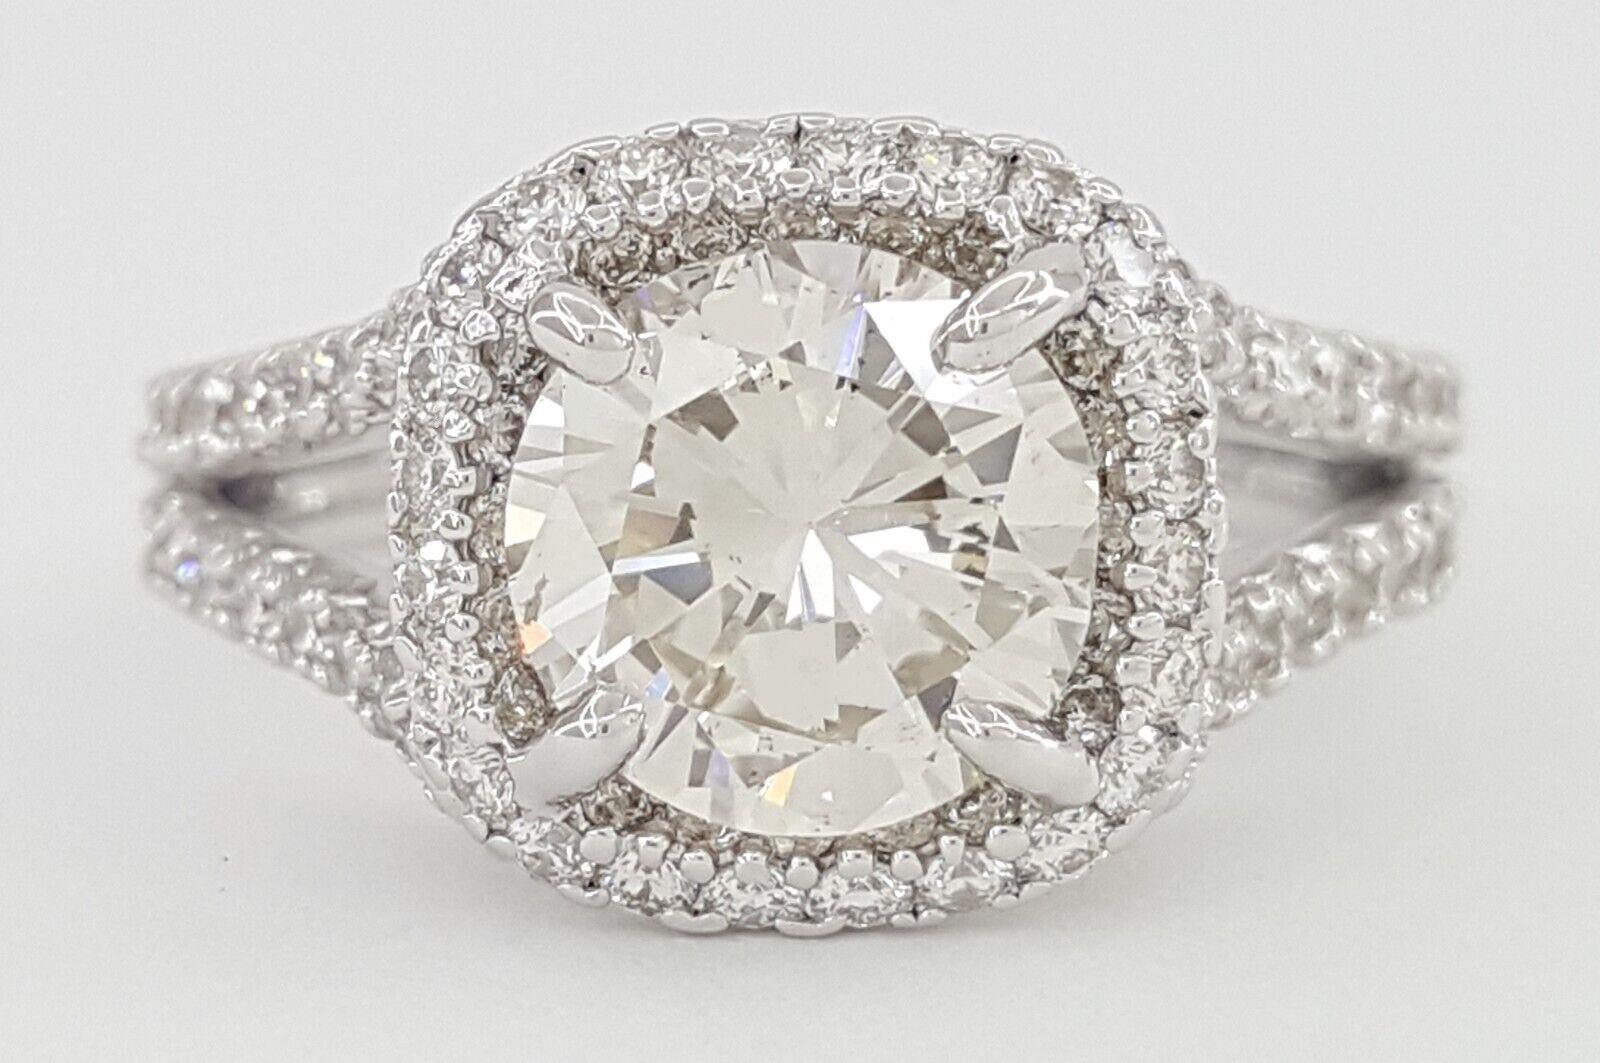 18k White Gold Engagement Ring featuring a Round Brilliant Cut Diamond Halo Split Shank with a total weight of 2.63 carats.

The main stone is a Natural Round Brilliant Cut diamond with a weight of 1.71 carats, exhibiting a K color and SI1-SI2